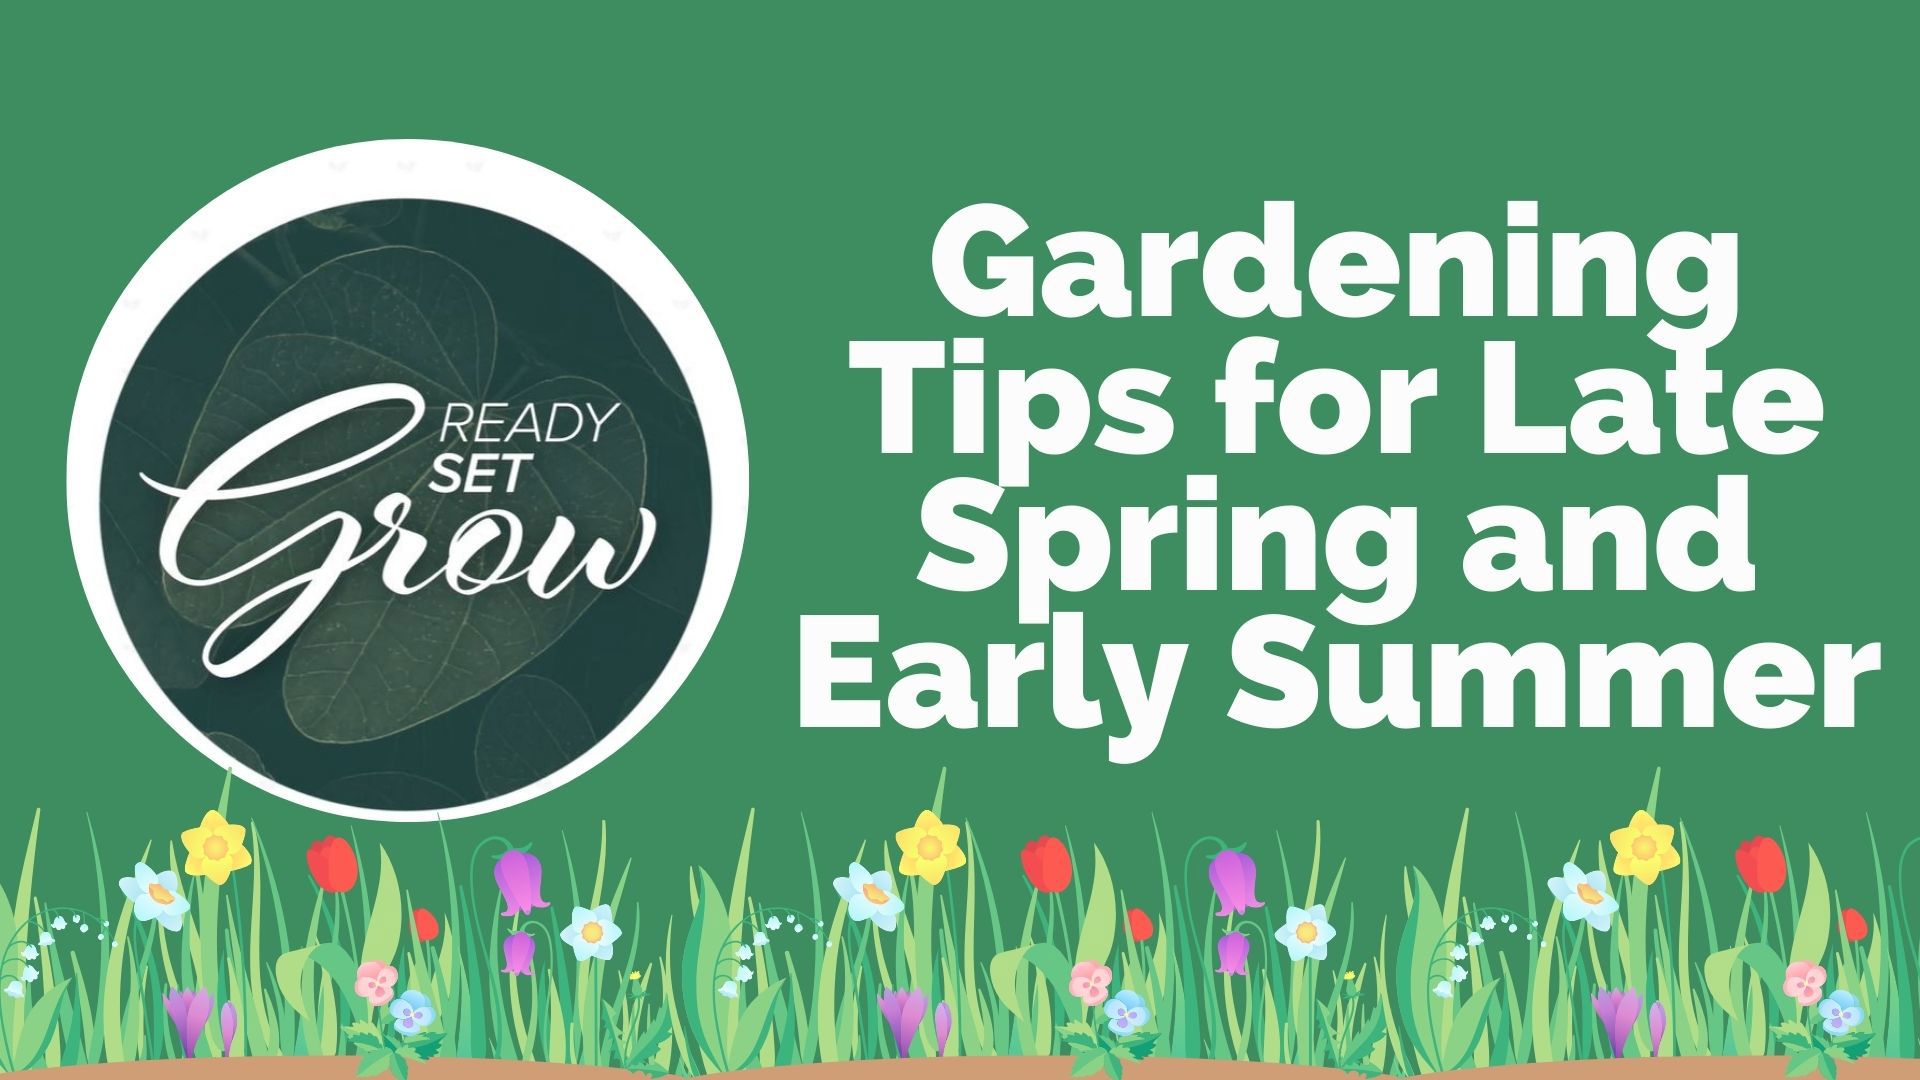 It is prime time for gardeners! The tips on what to plant right now in early spring/late summer and how you can keep wildlife out of your garden.